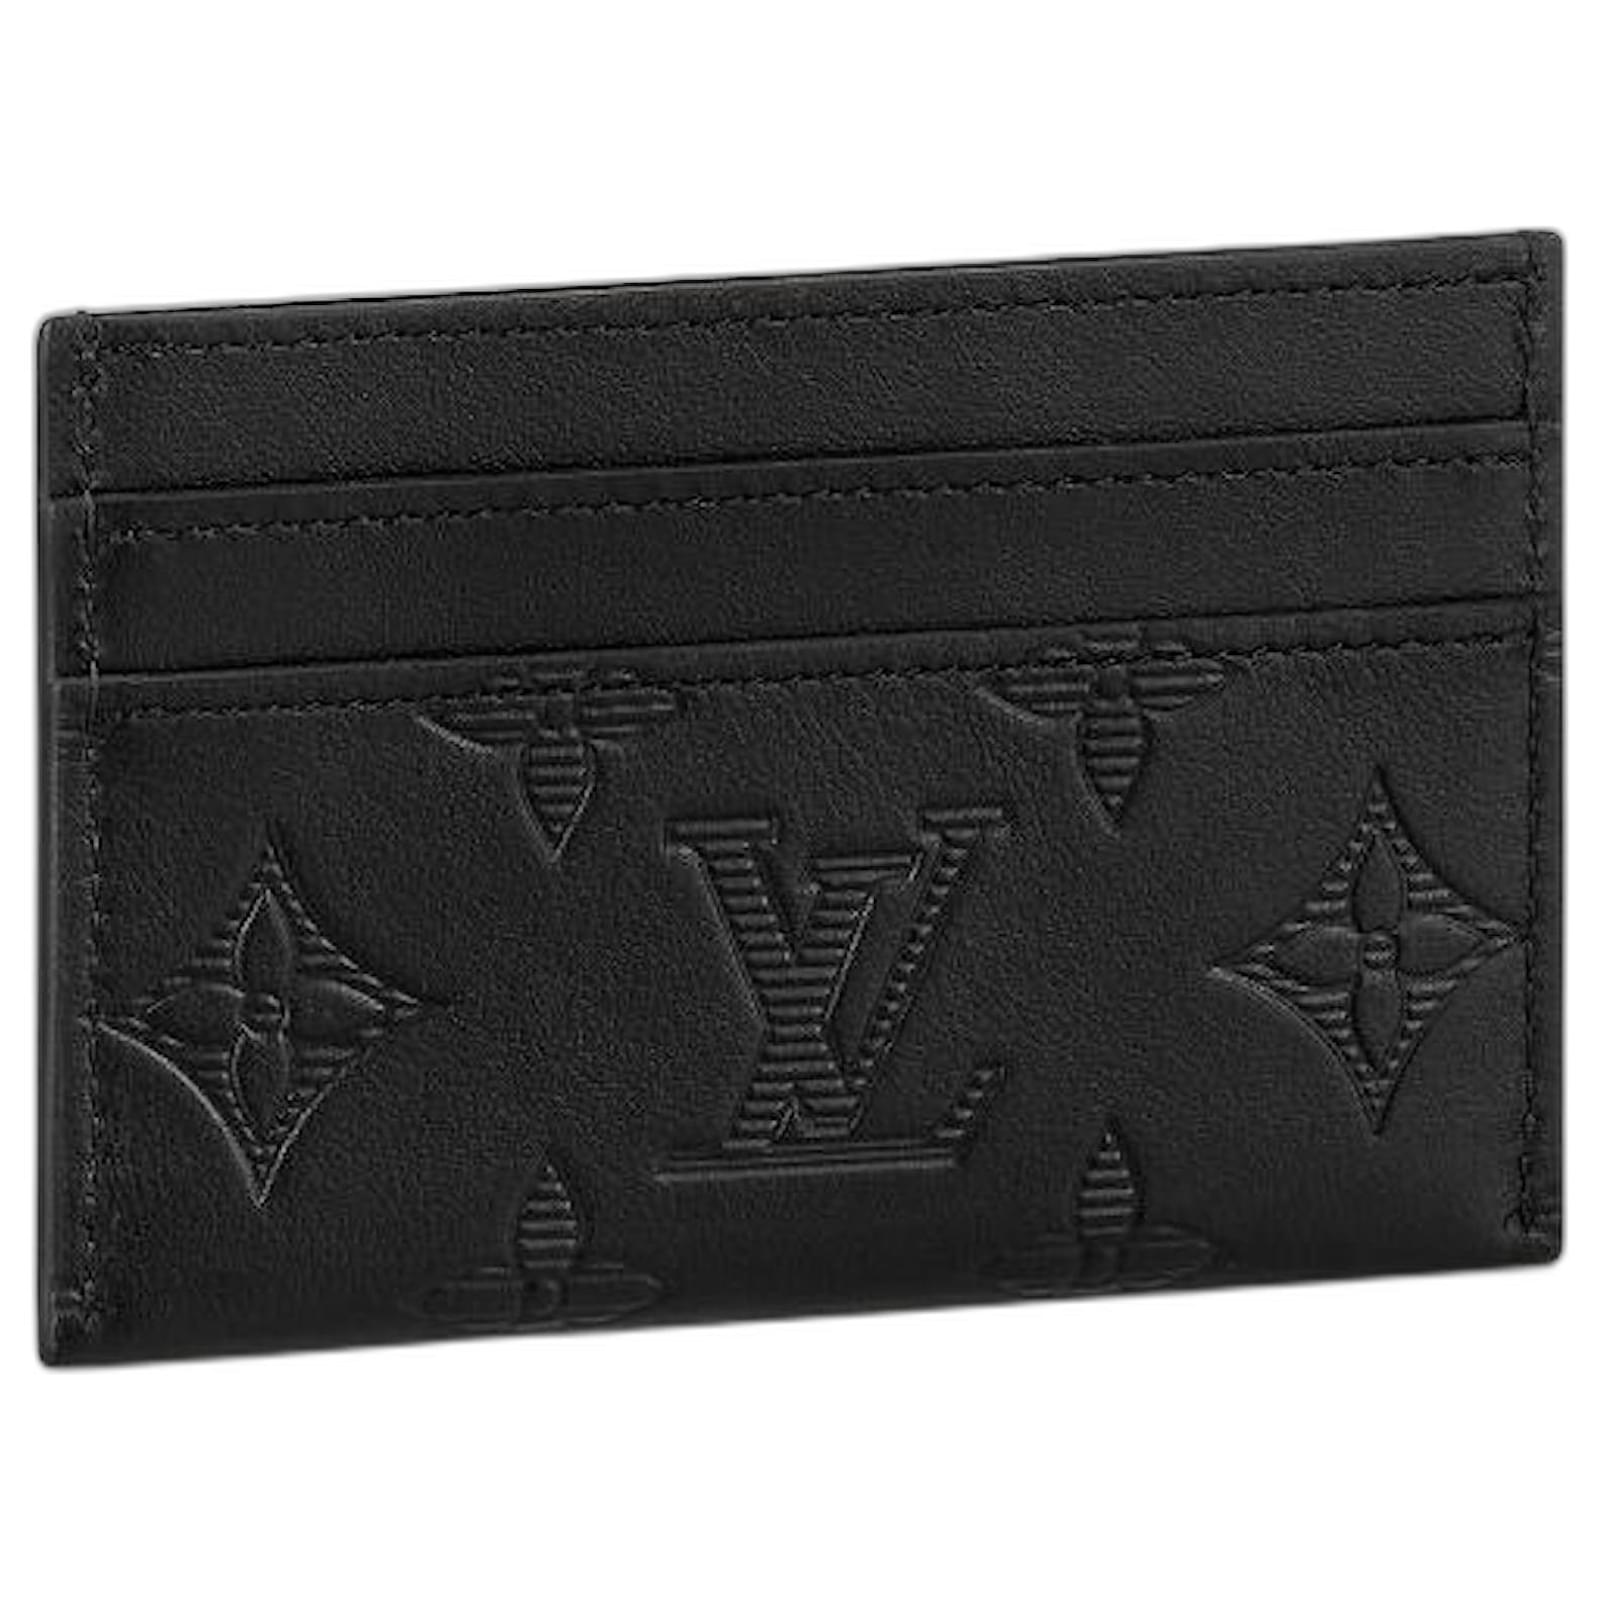 Wallets Small Accessories Louis Vuitton LV Lined Card Holder Leather